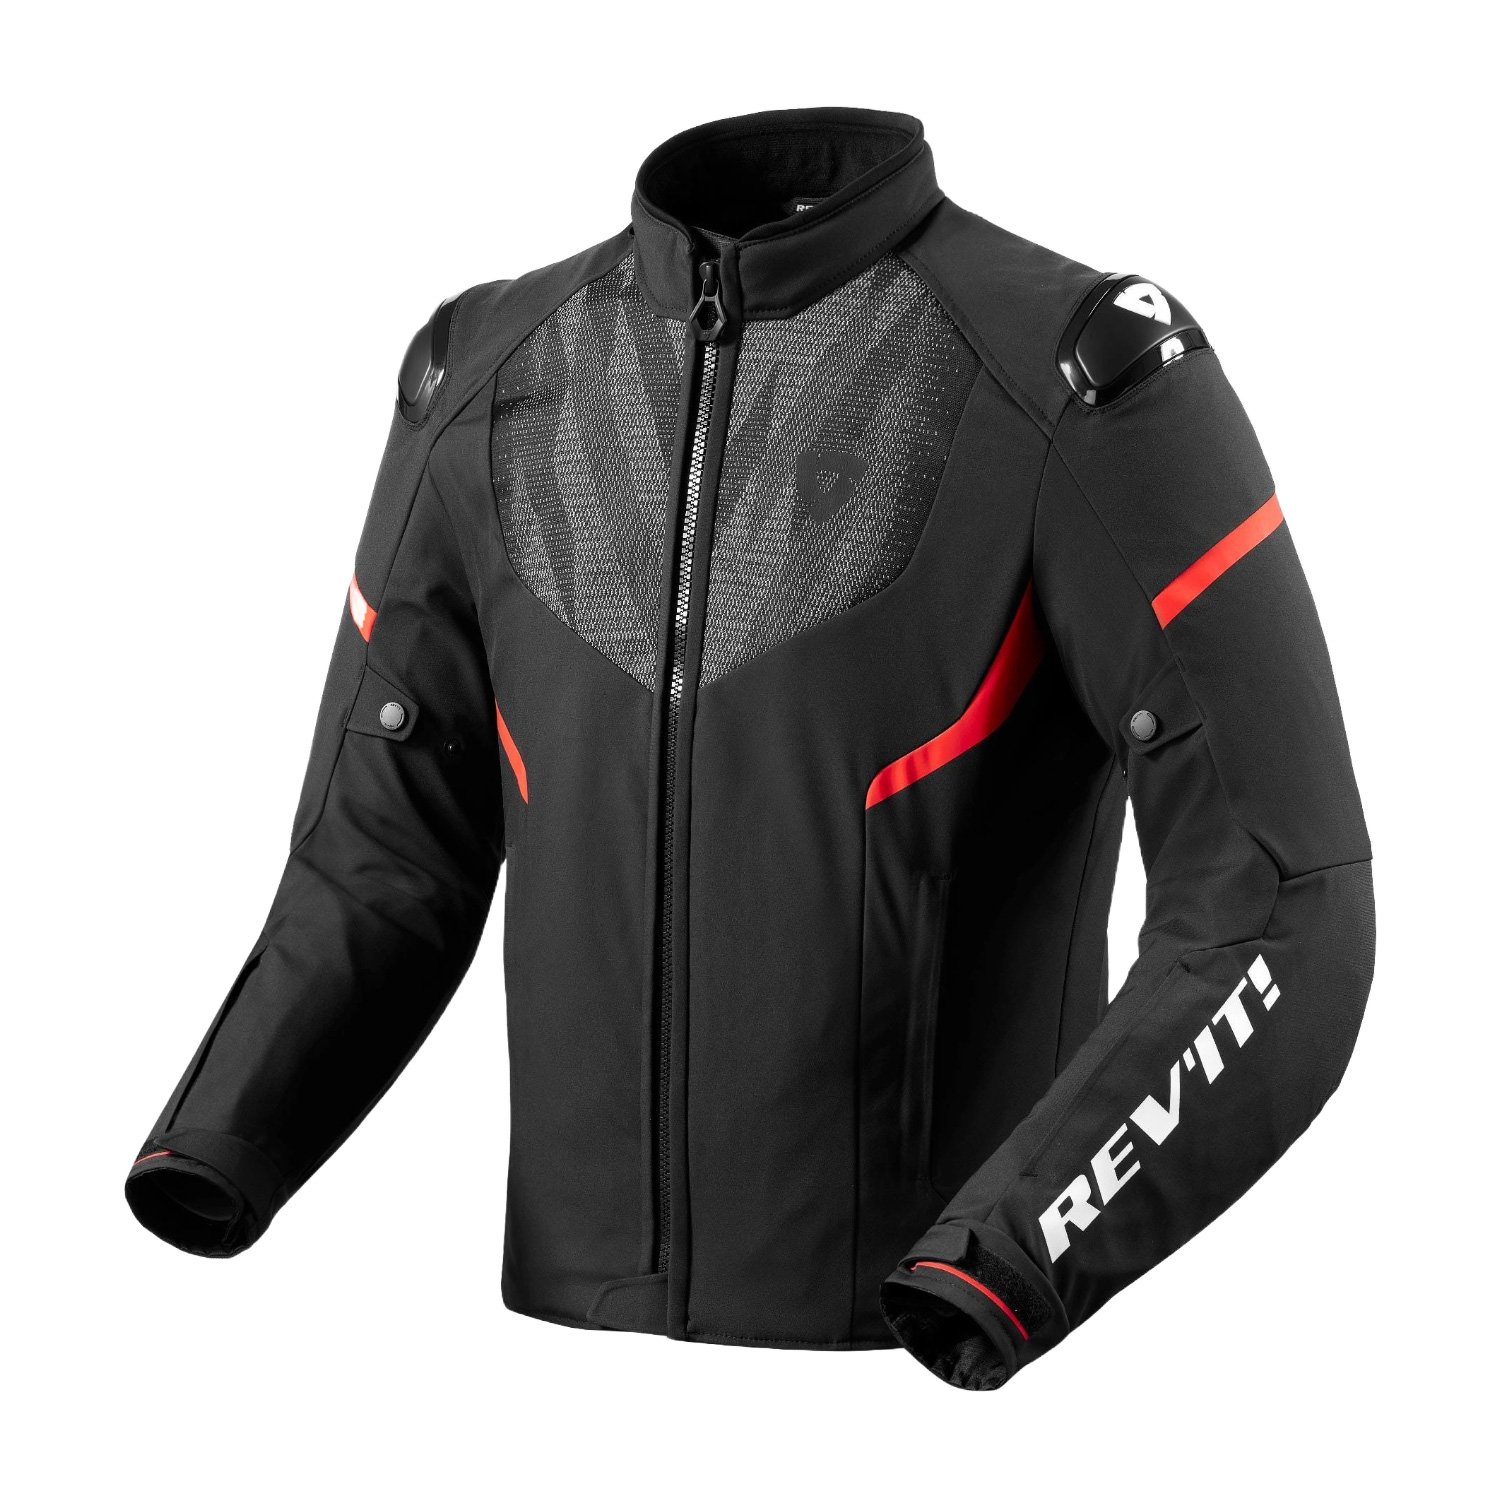 Image of REV'IT! Hyperspeed 2 H2O Jacket Black Neon Red Size 3XL ID 8700001367271